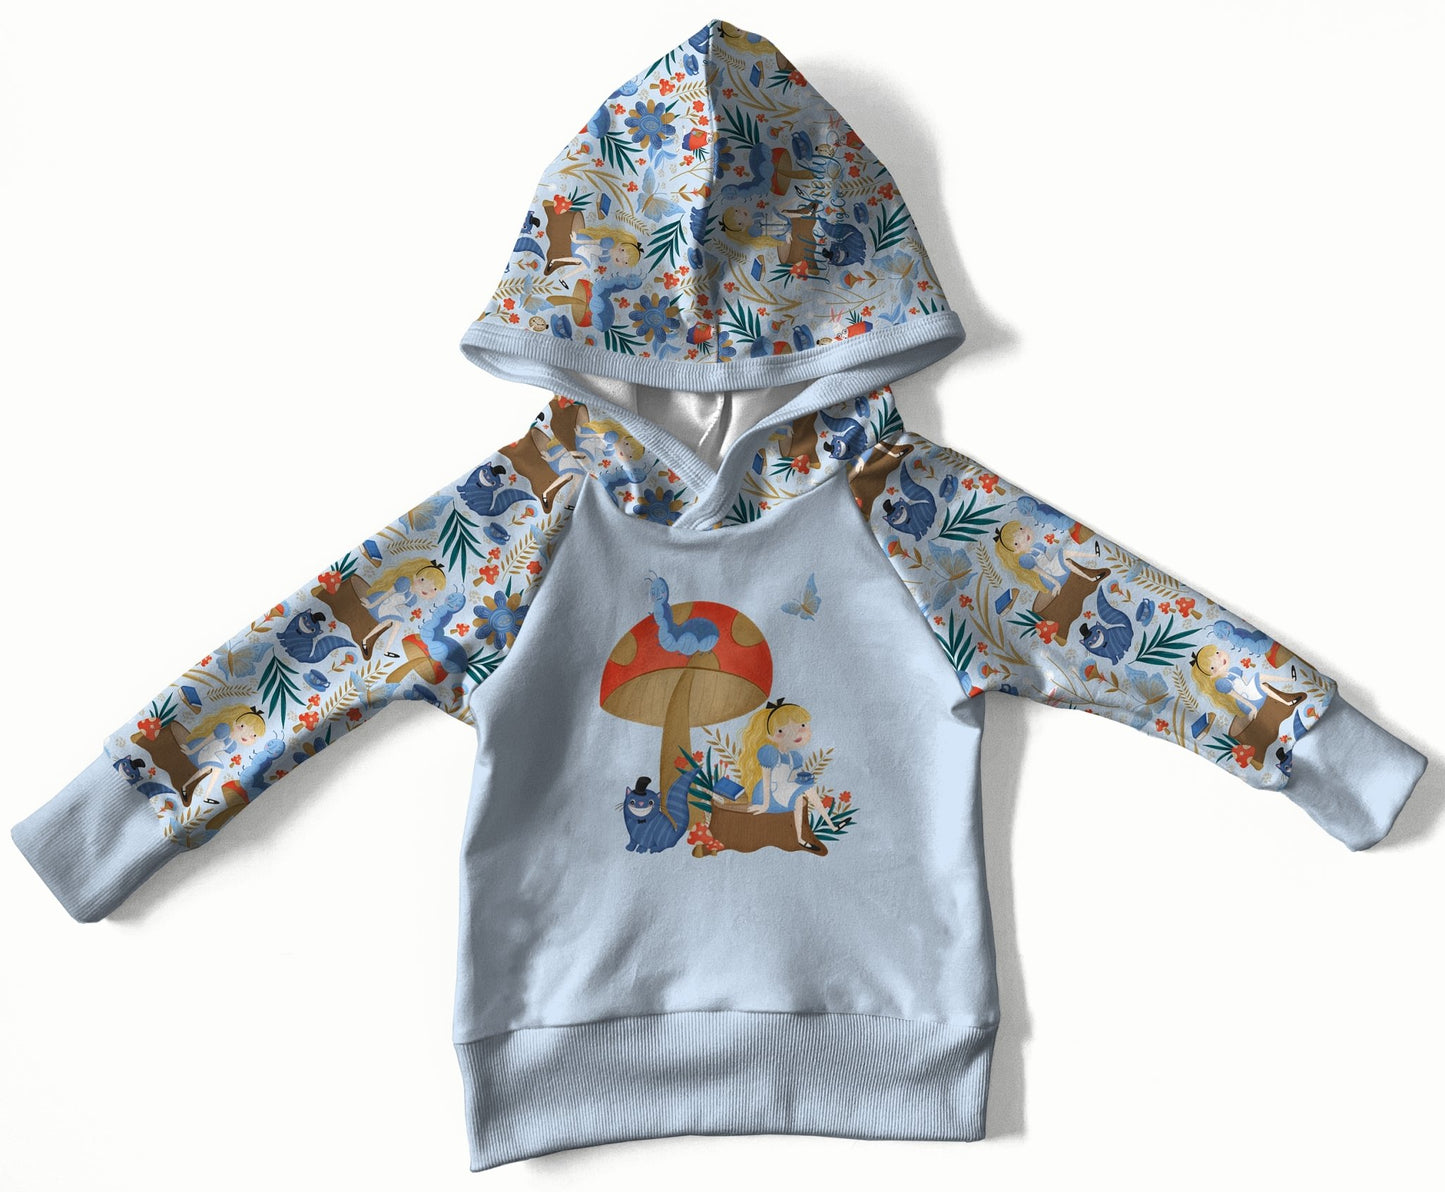 Light blue hoodie with an Alice in Wonderland print